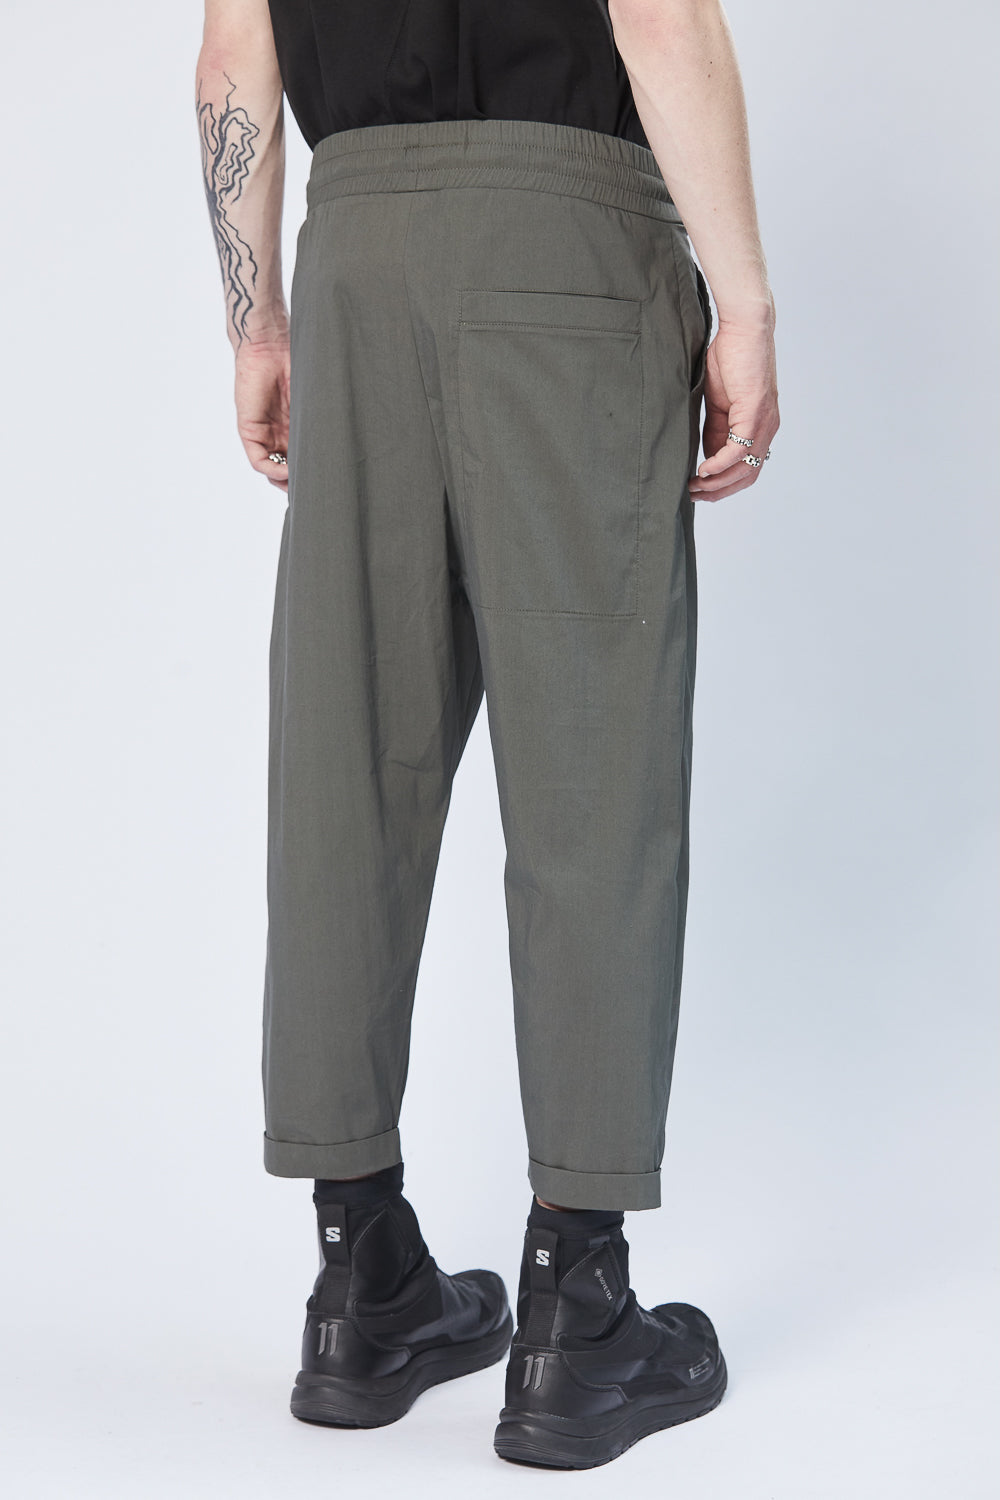 Buy the Thom Krom M ST 431 Sweatpants in Green at Intro. Spend £50 for free UK delivery. Official stockists. We ship worldwide.